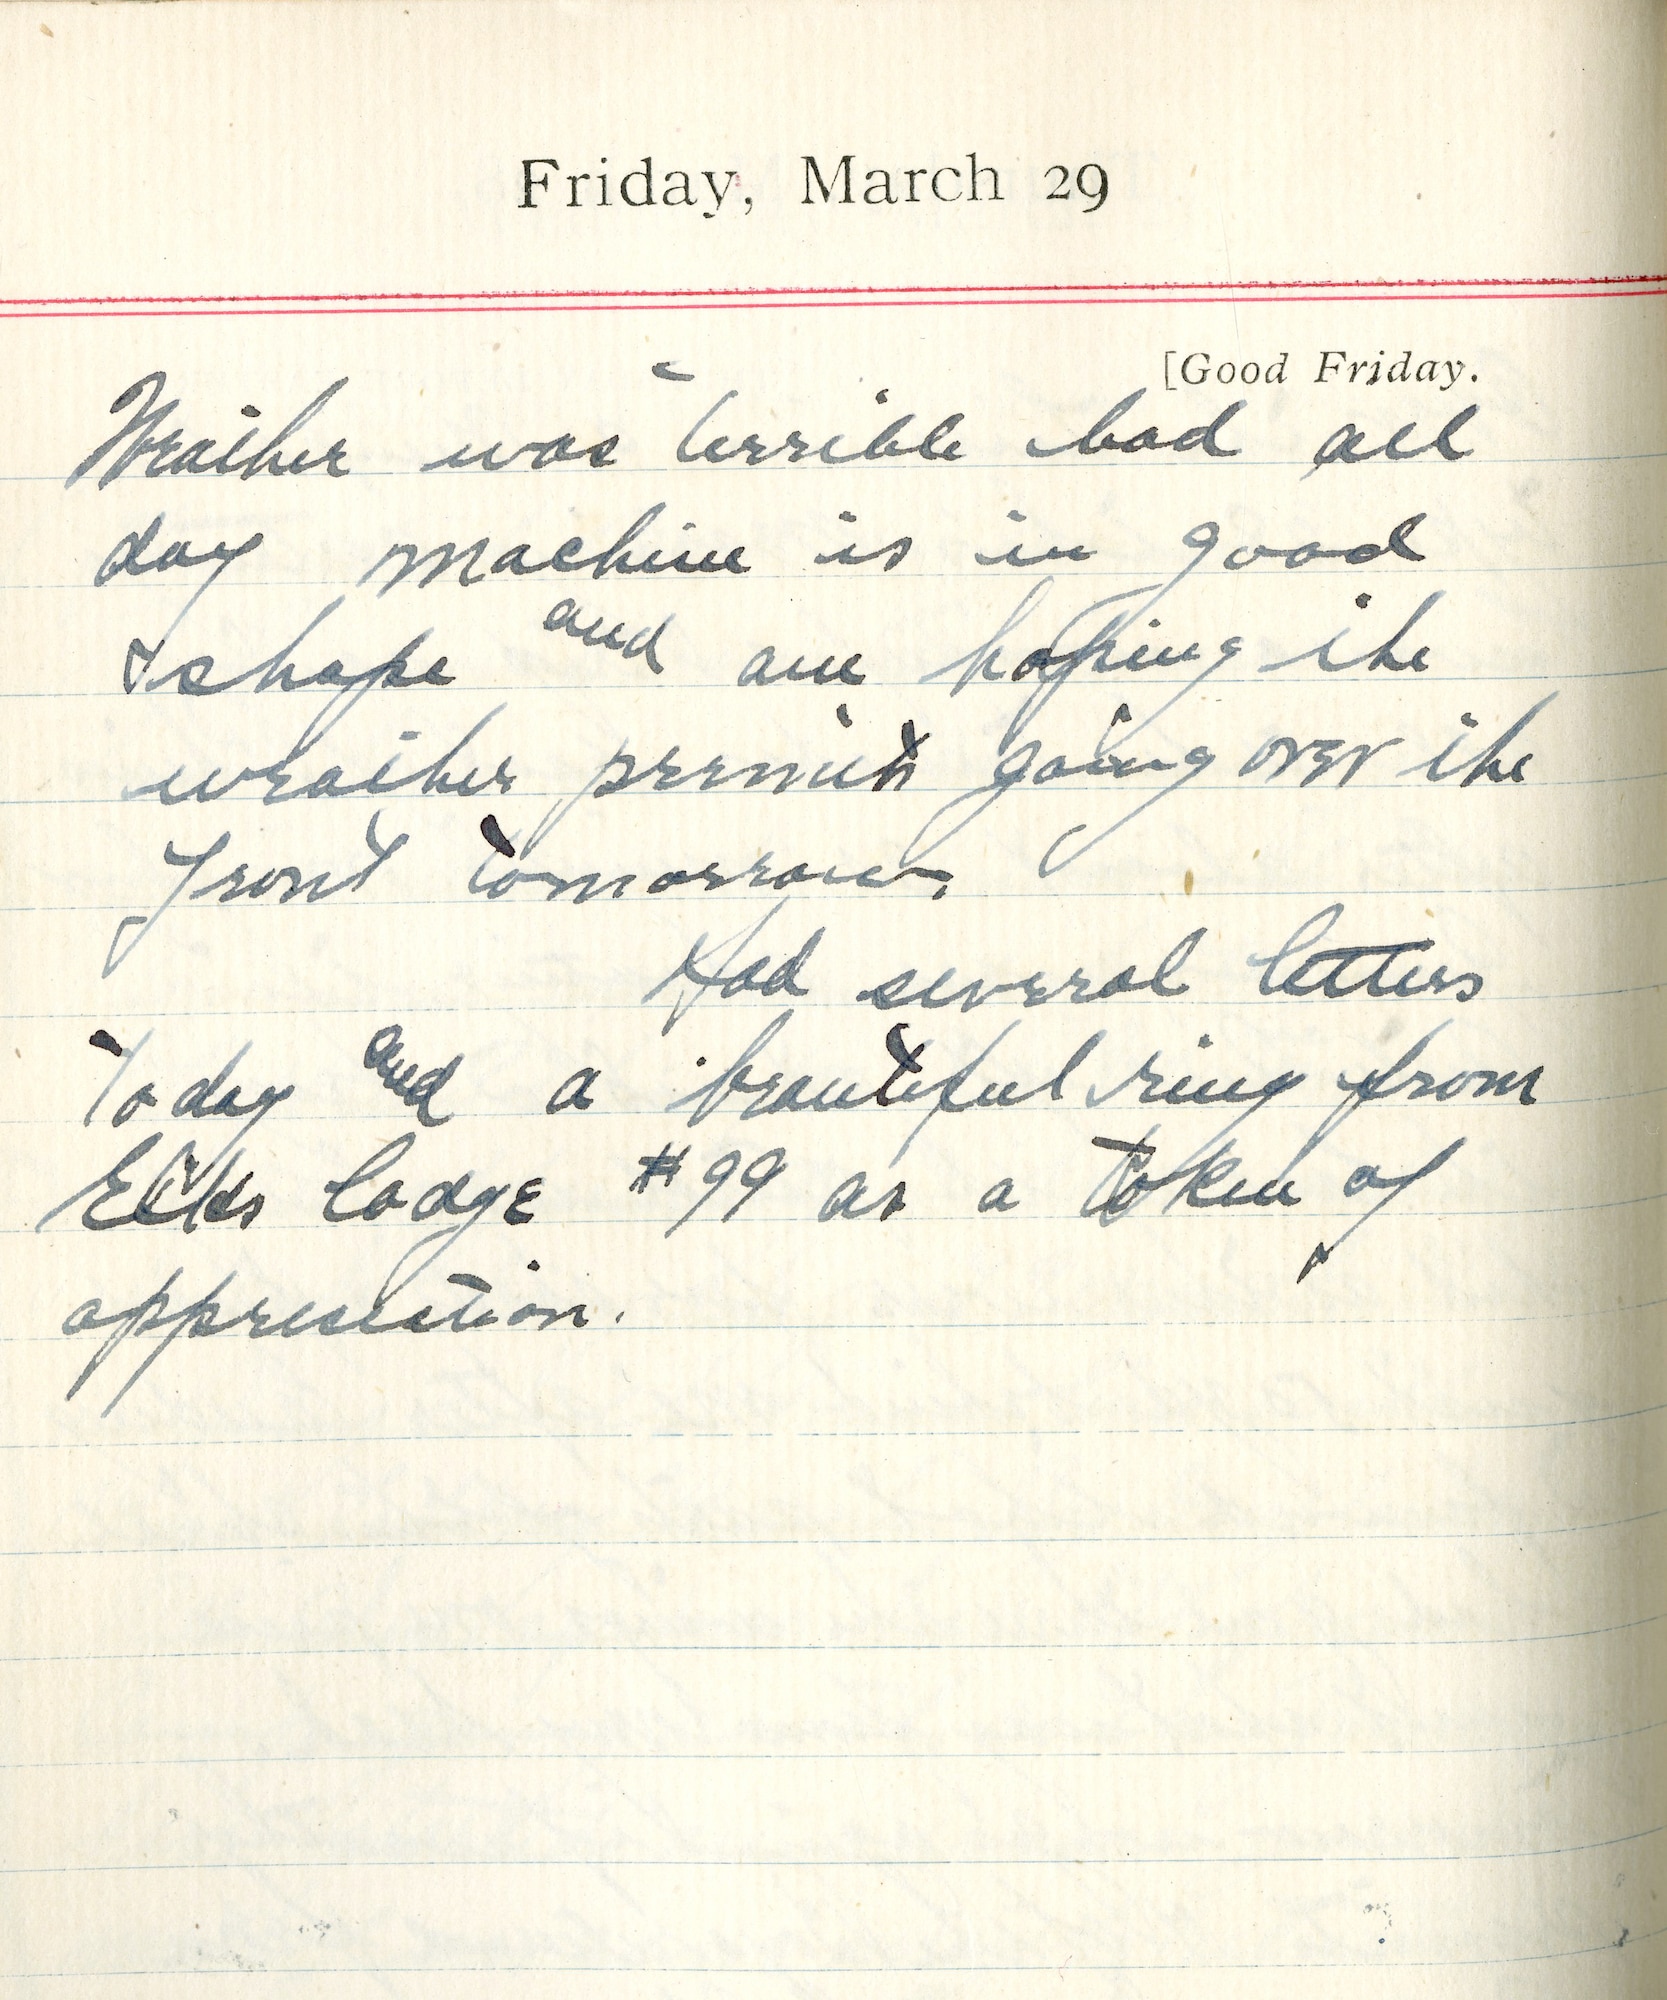 Capt. Edward V. Rickenbacker's 1918 wartime diary entry. (03/29/1918).

Weather was terrible bad all day.  Machine is in good shape and am hoping the weather permits going over the front tomorrow.

Had several letters today and a beautiful ring from Elks Lodge #99 as a token of appreciation.